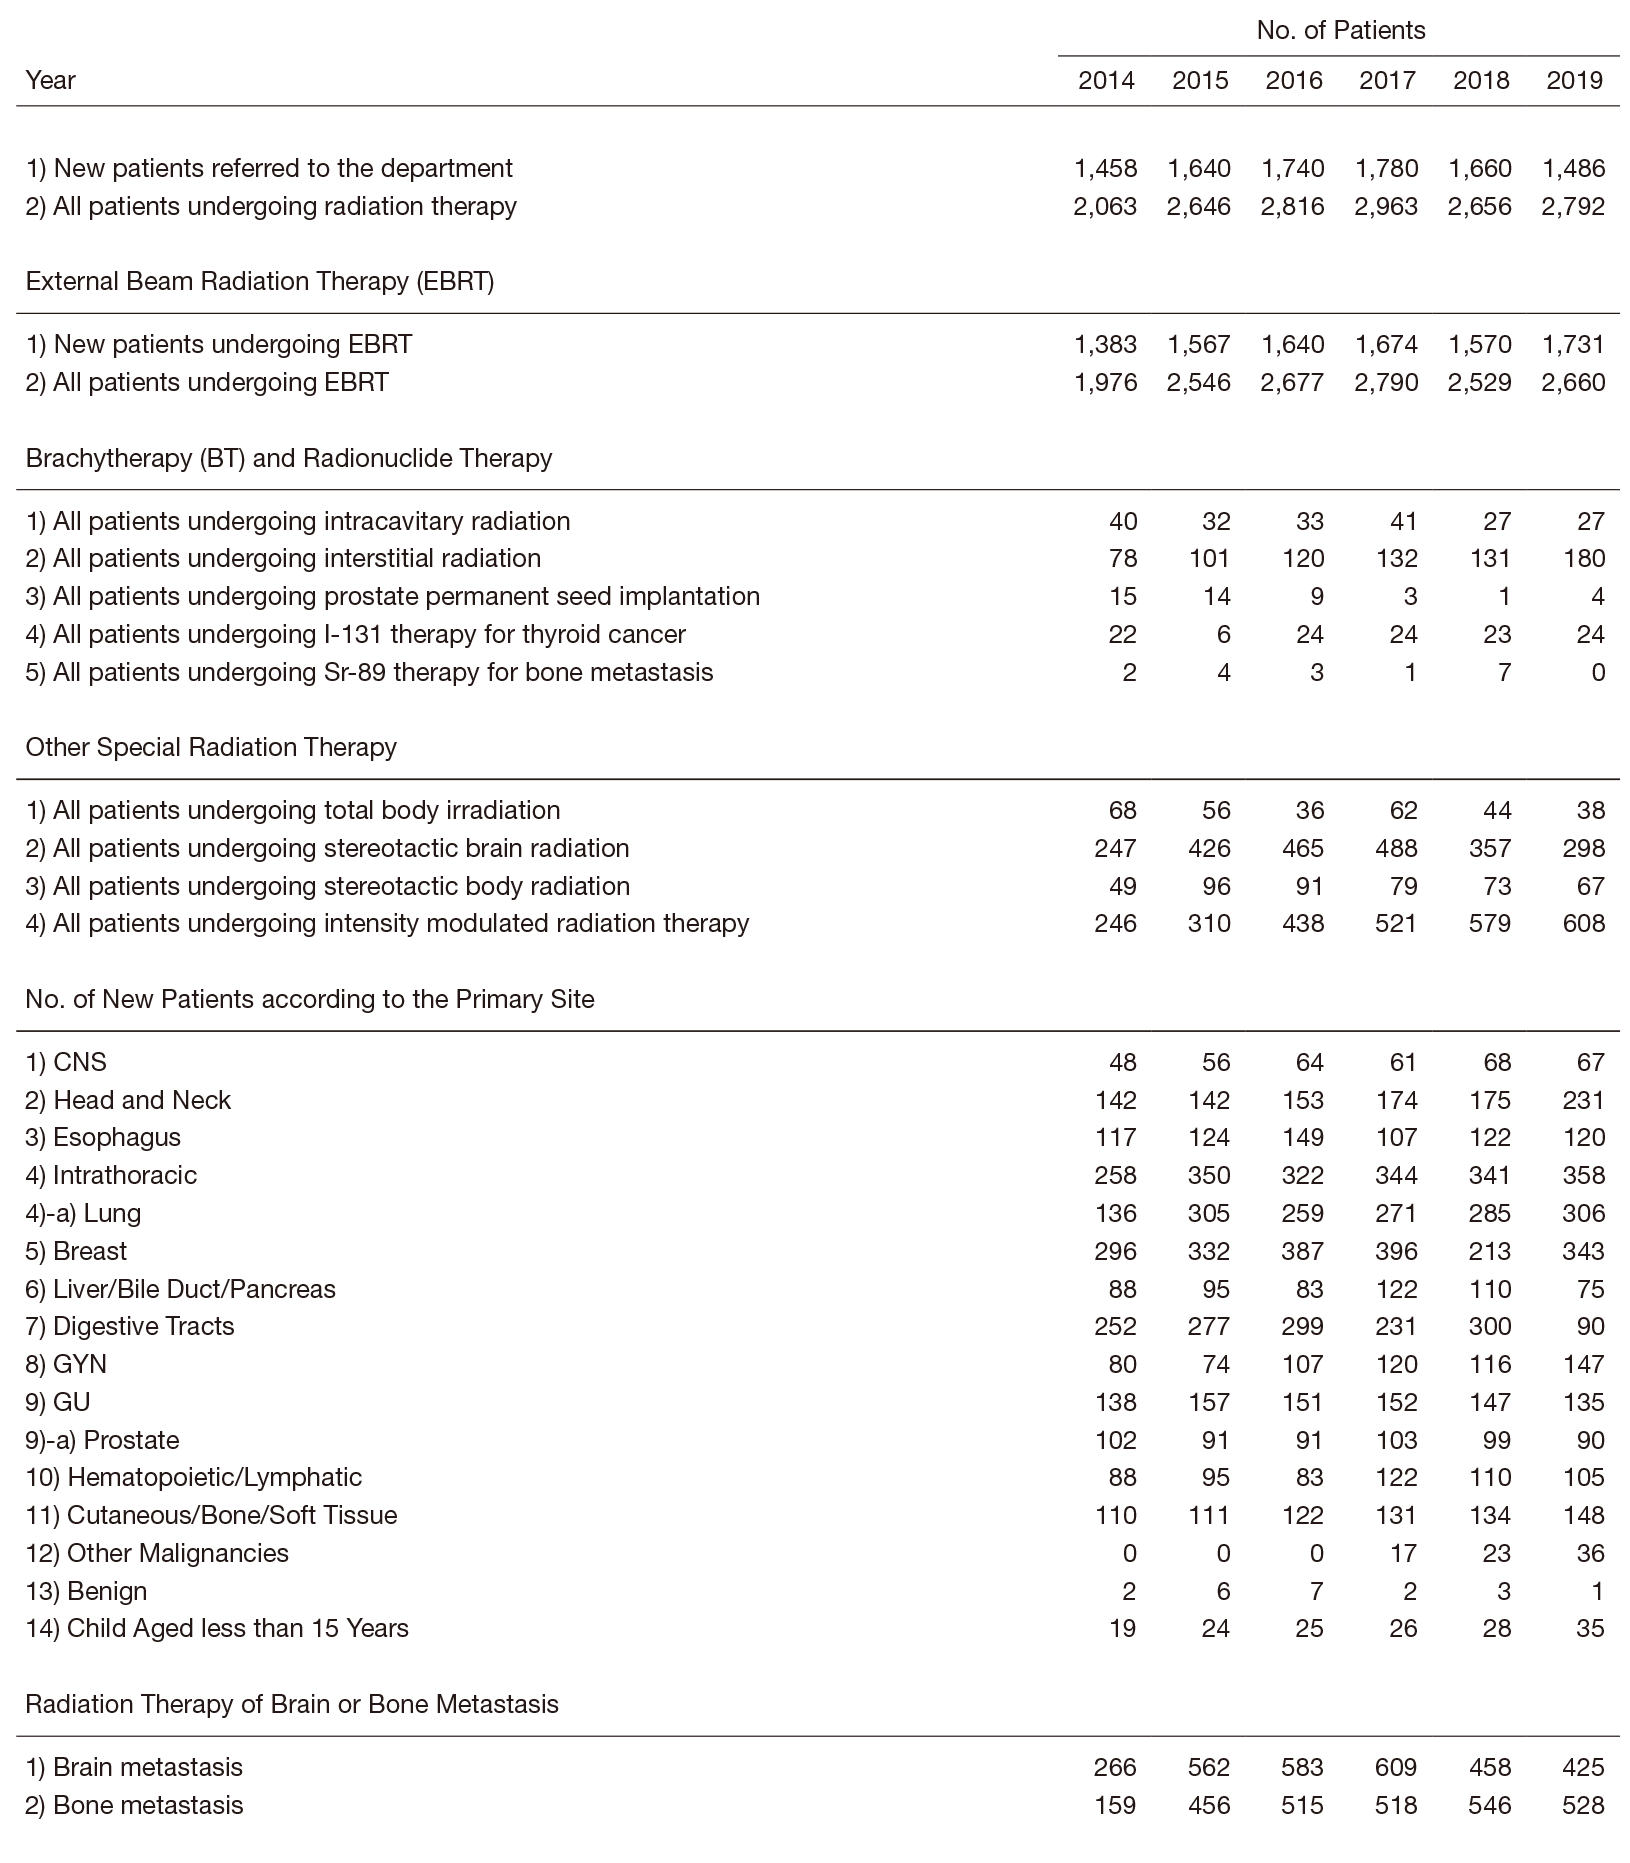 Table 1.  Number of Patients undergoing Radiation Therapy